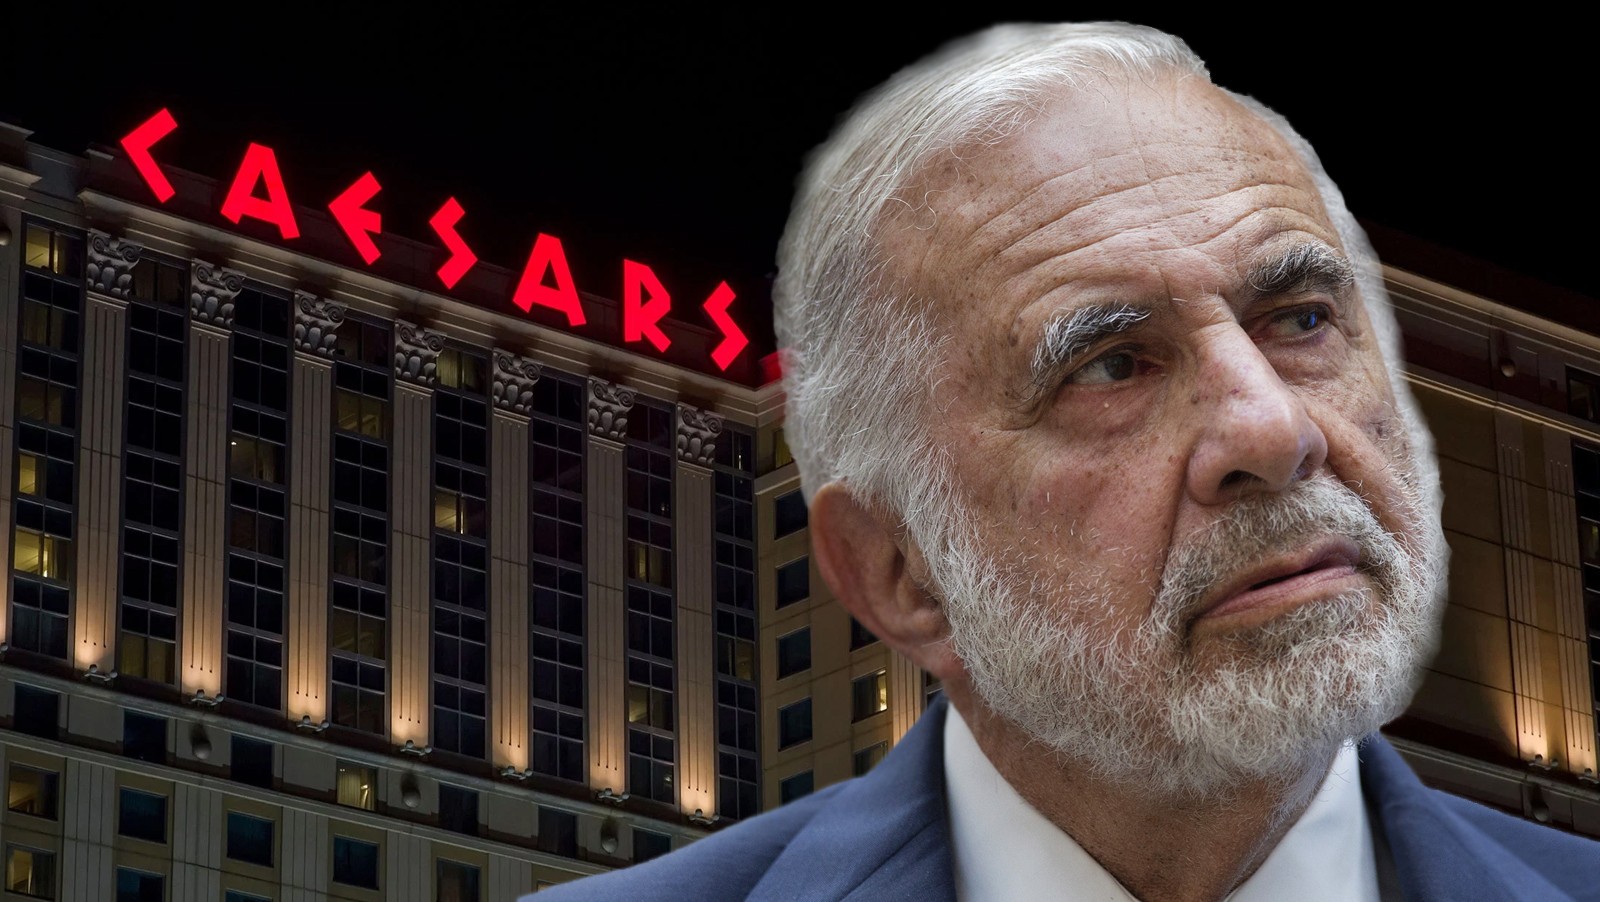 Good Luck to Carl Icahn Rescuing Caesars’ Accounting Black Hole